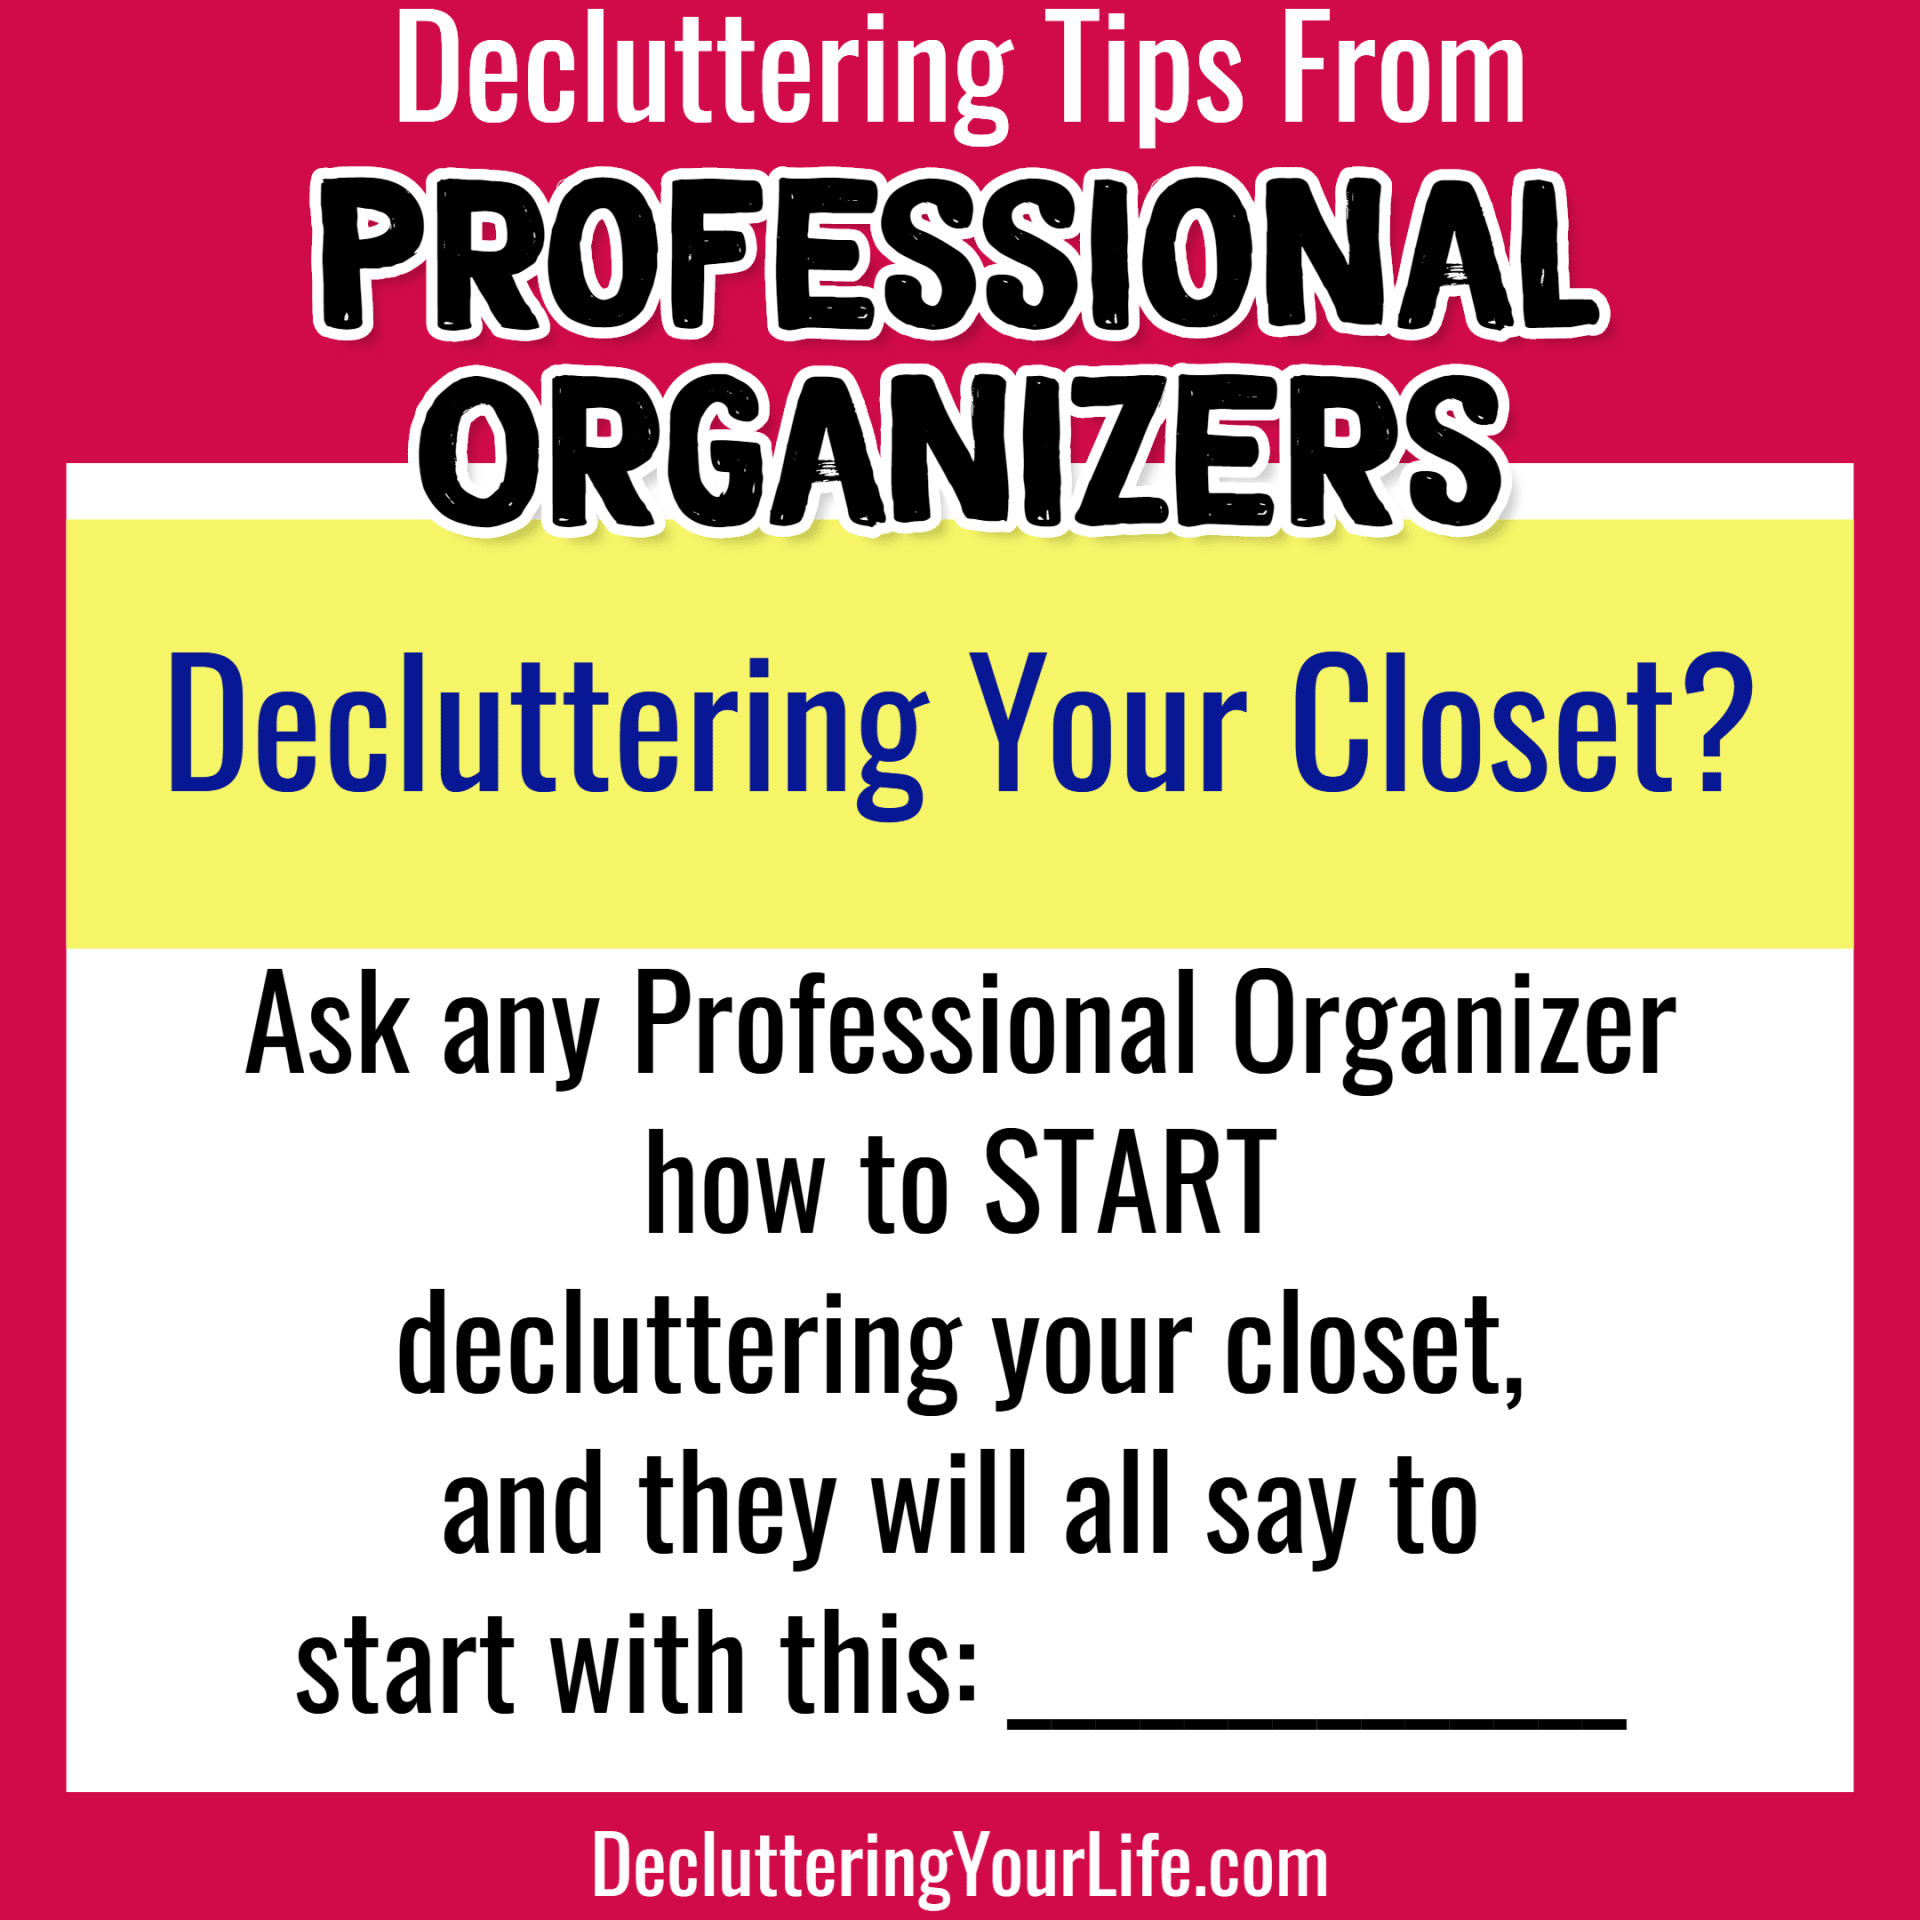 Tips from Professional organizers to stop feeling overwhelmed by messy house and clutter - learn how to declutter and organize your home FAST like Professional organizers do